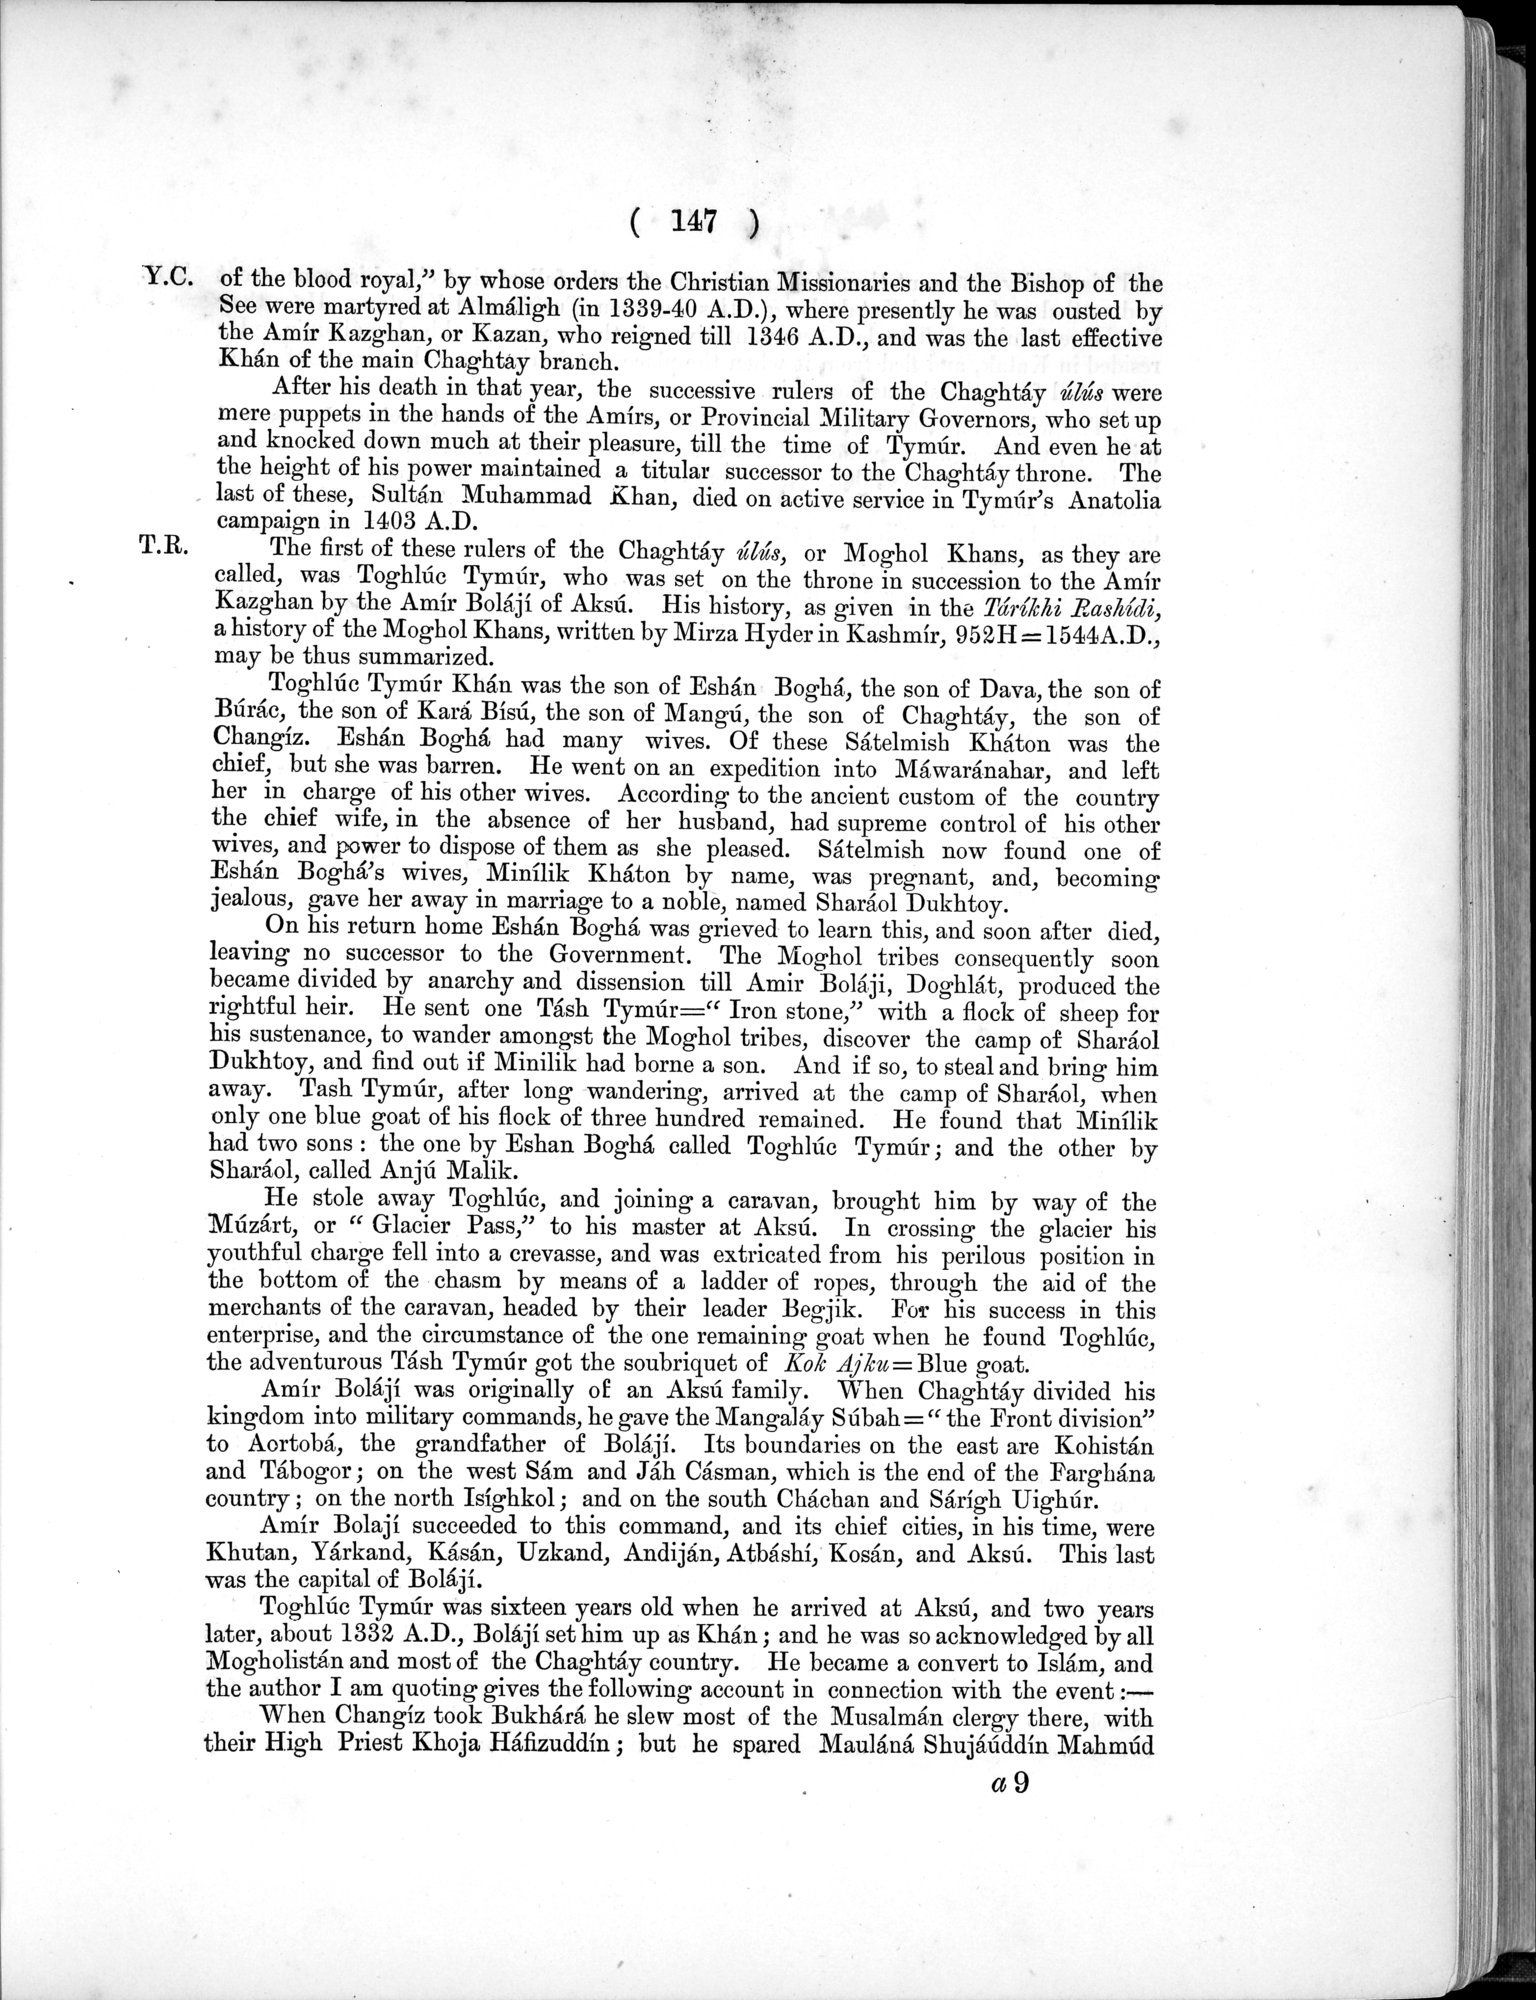 Report of a Mission to Yarkund in 1873 : vol.1 / Page 219 (Grayscale High Resolution Image)